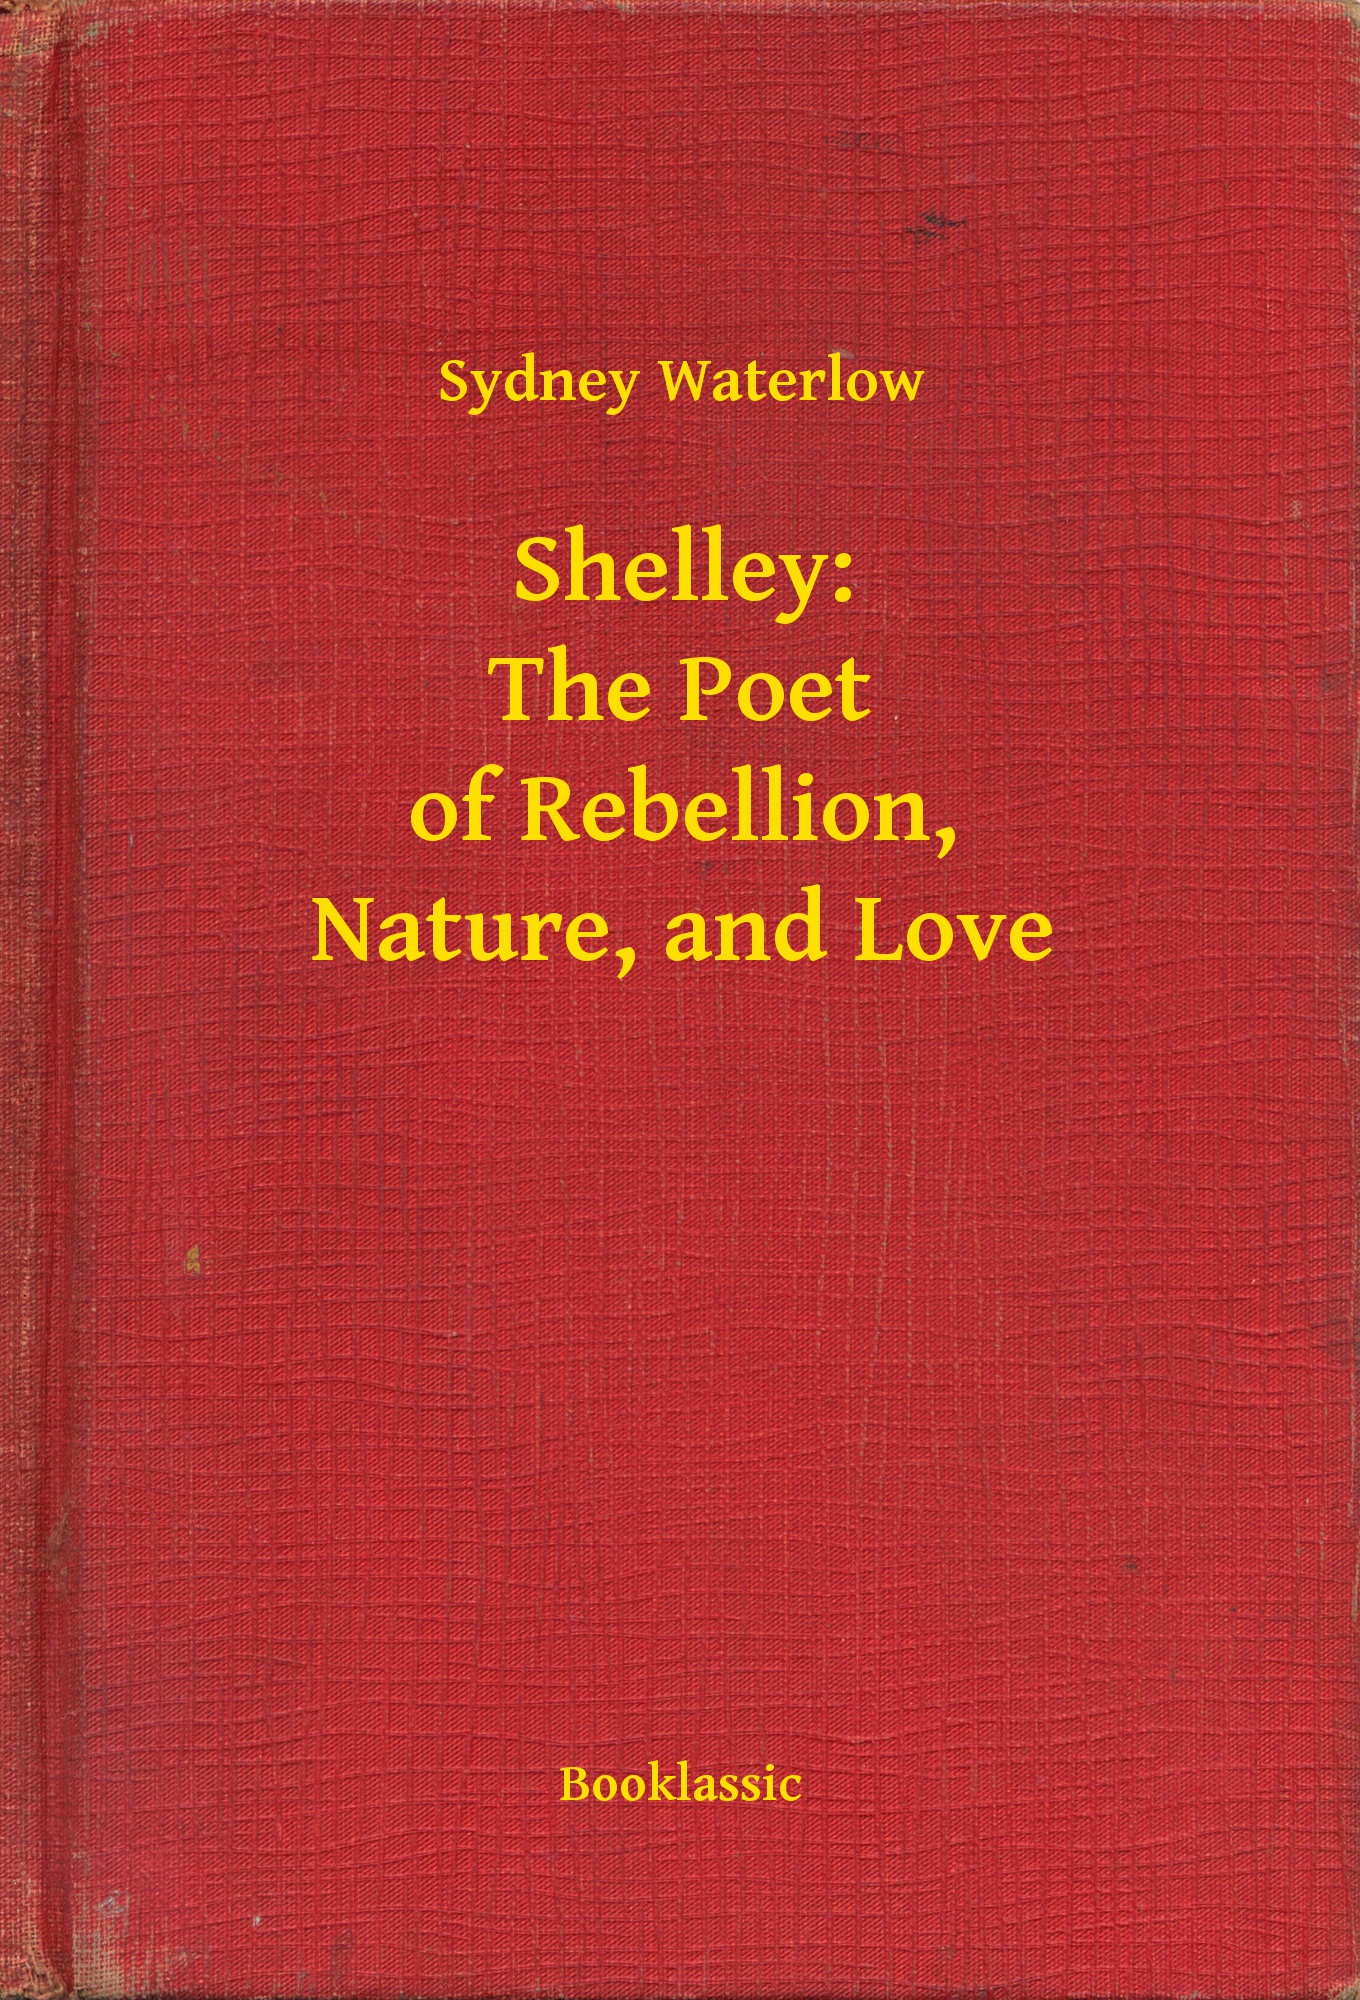 Shelley: The Poet of Rebellion, Nature, and Love